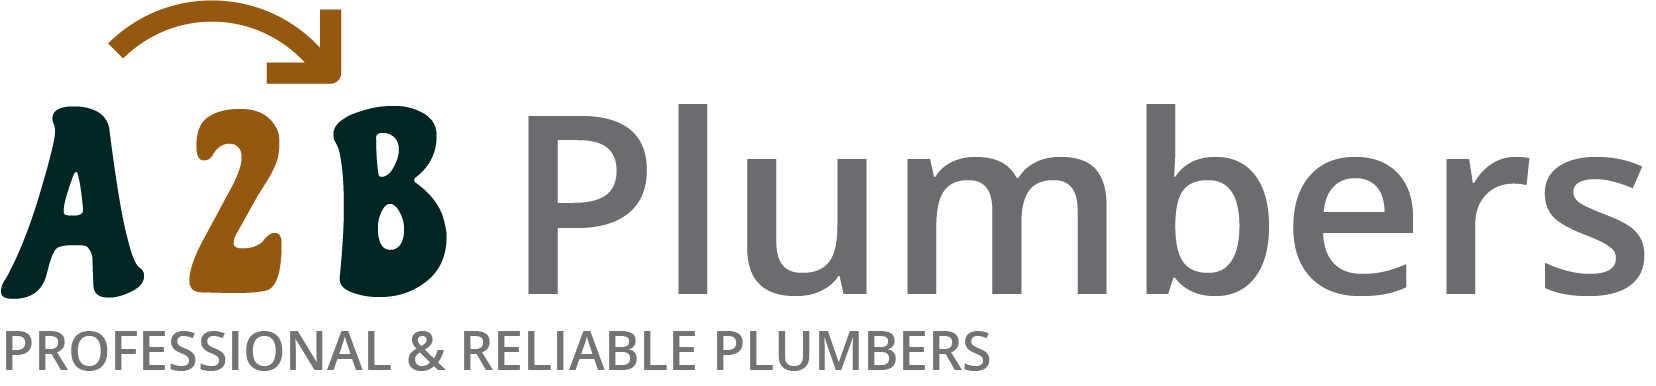 If you need a boiler installed, a radiator repaired or a leaking tap fixed, call us now - we provide services for properties in Nunhead and the local area.